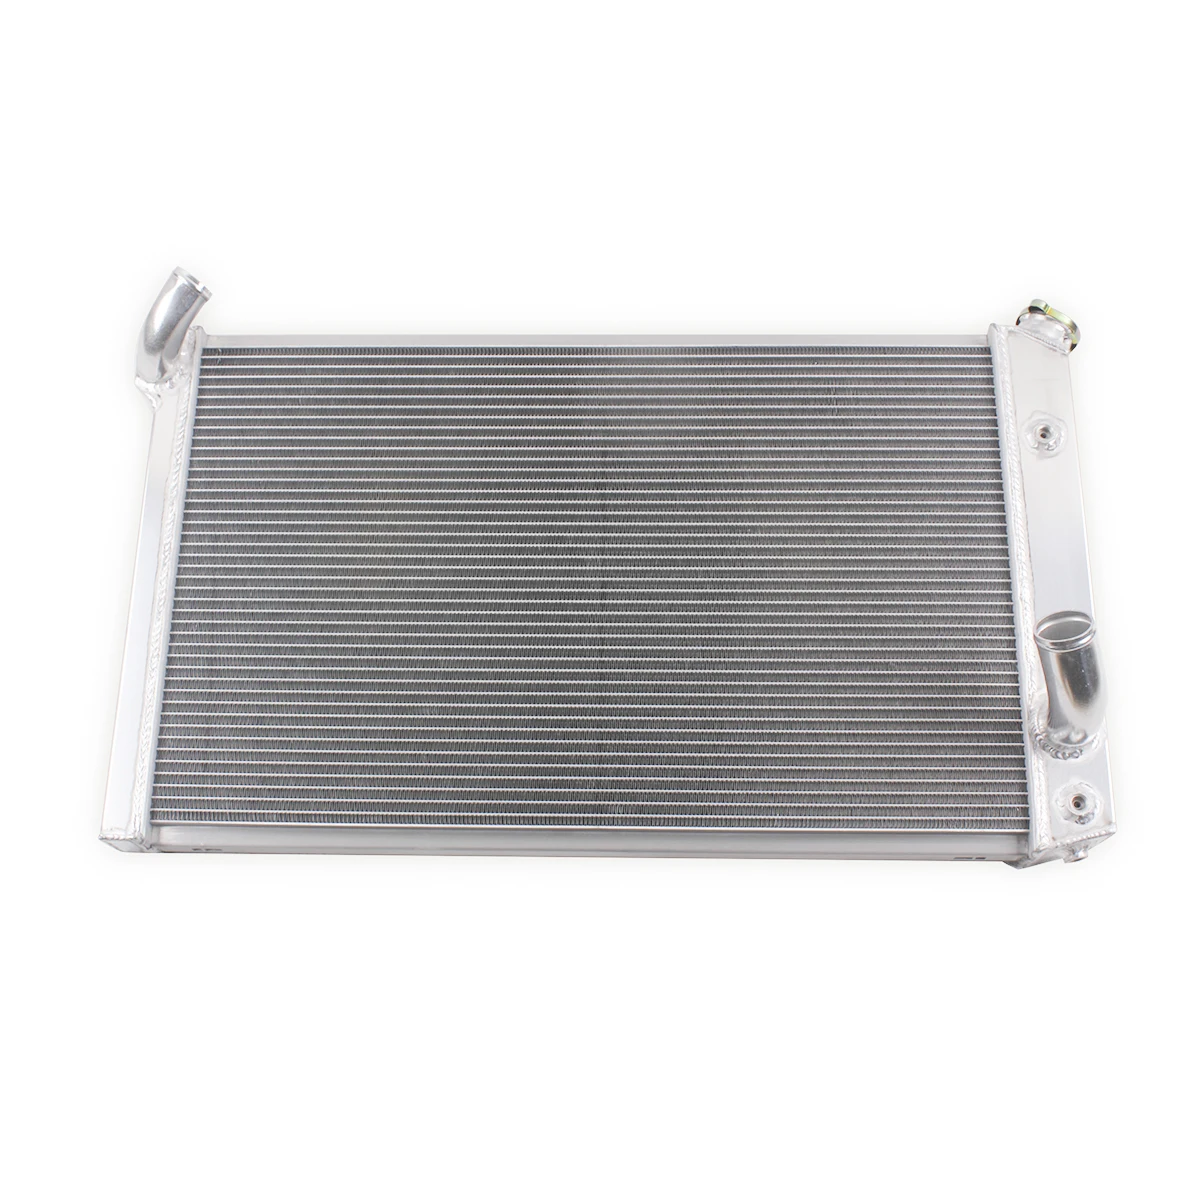 

Aluminum 3 Row Performance Cooling Radiator Fit Chevy Corvette V8 5.7/7.4 1973-1976 Cover Coolant Radiator, Silver